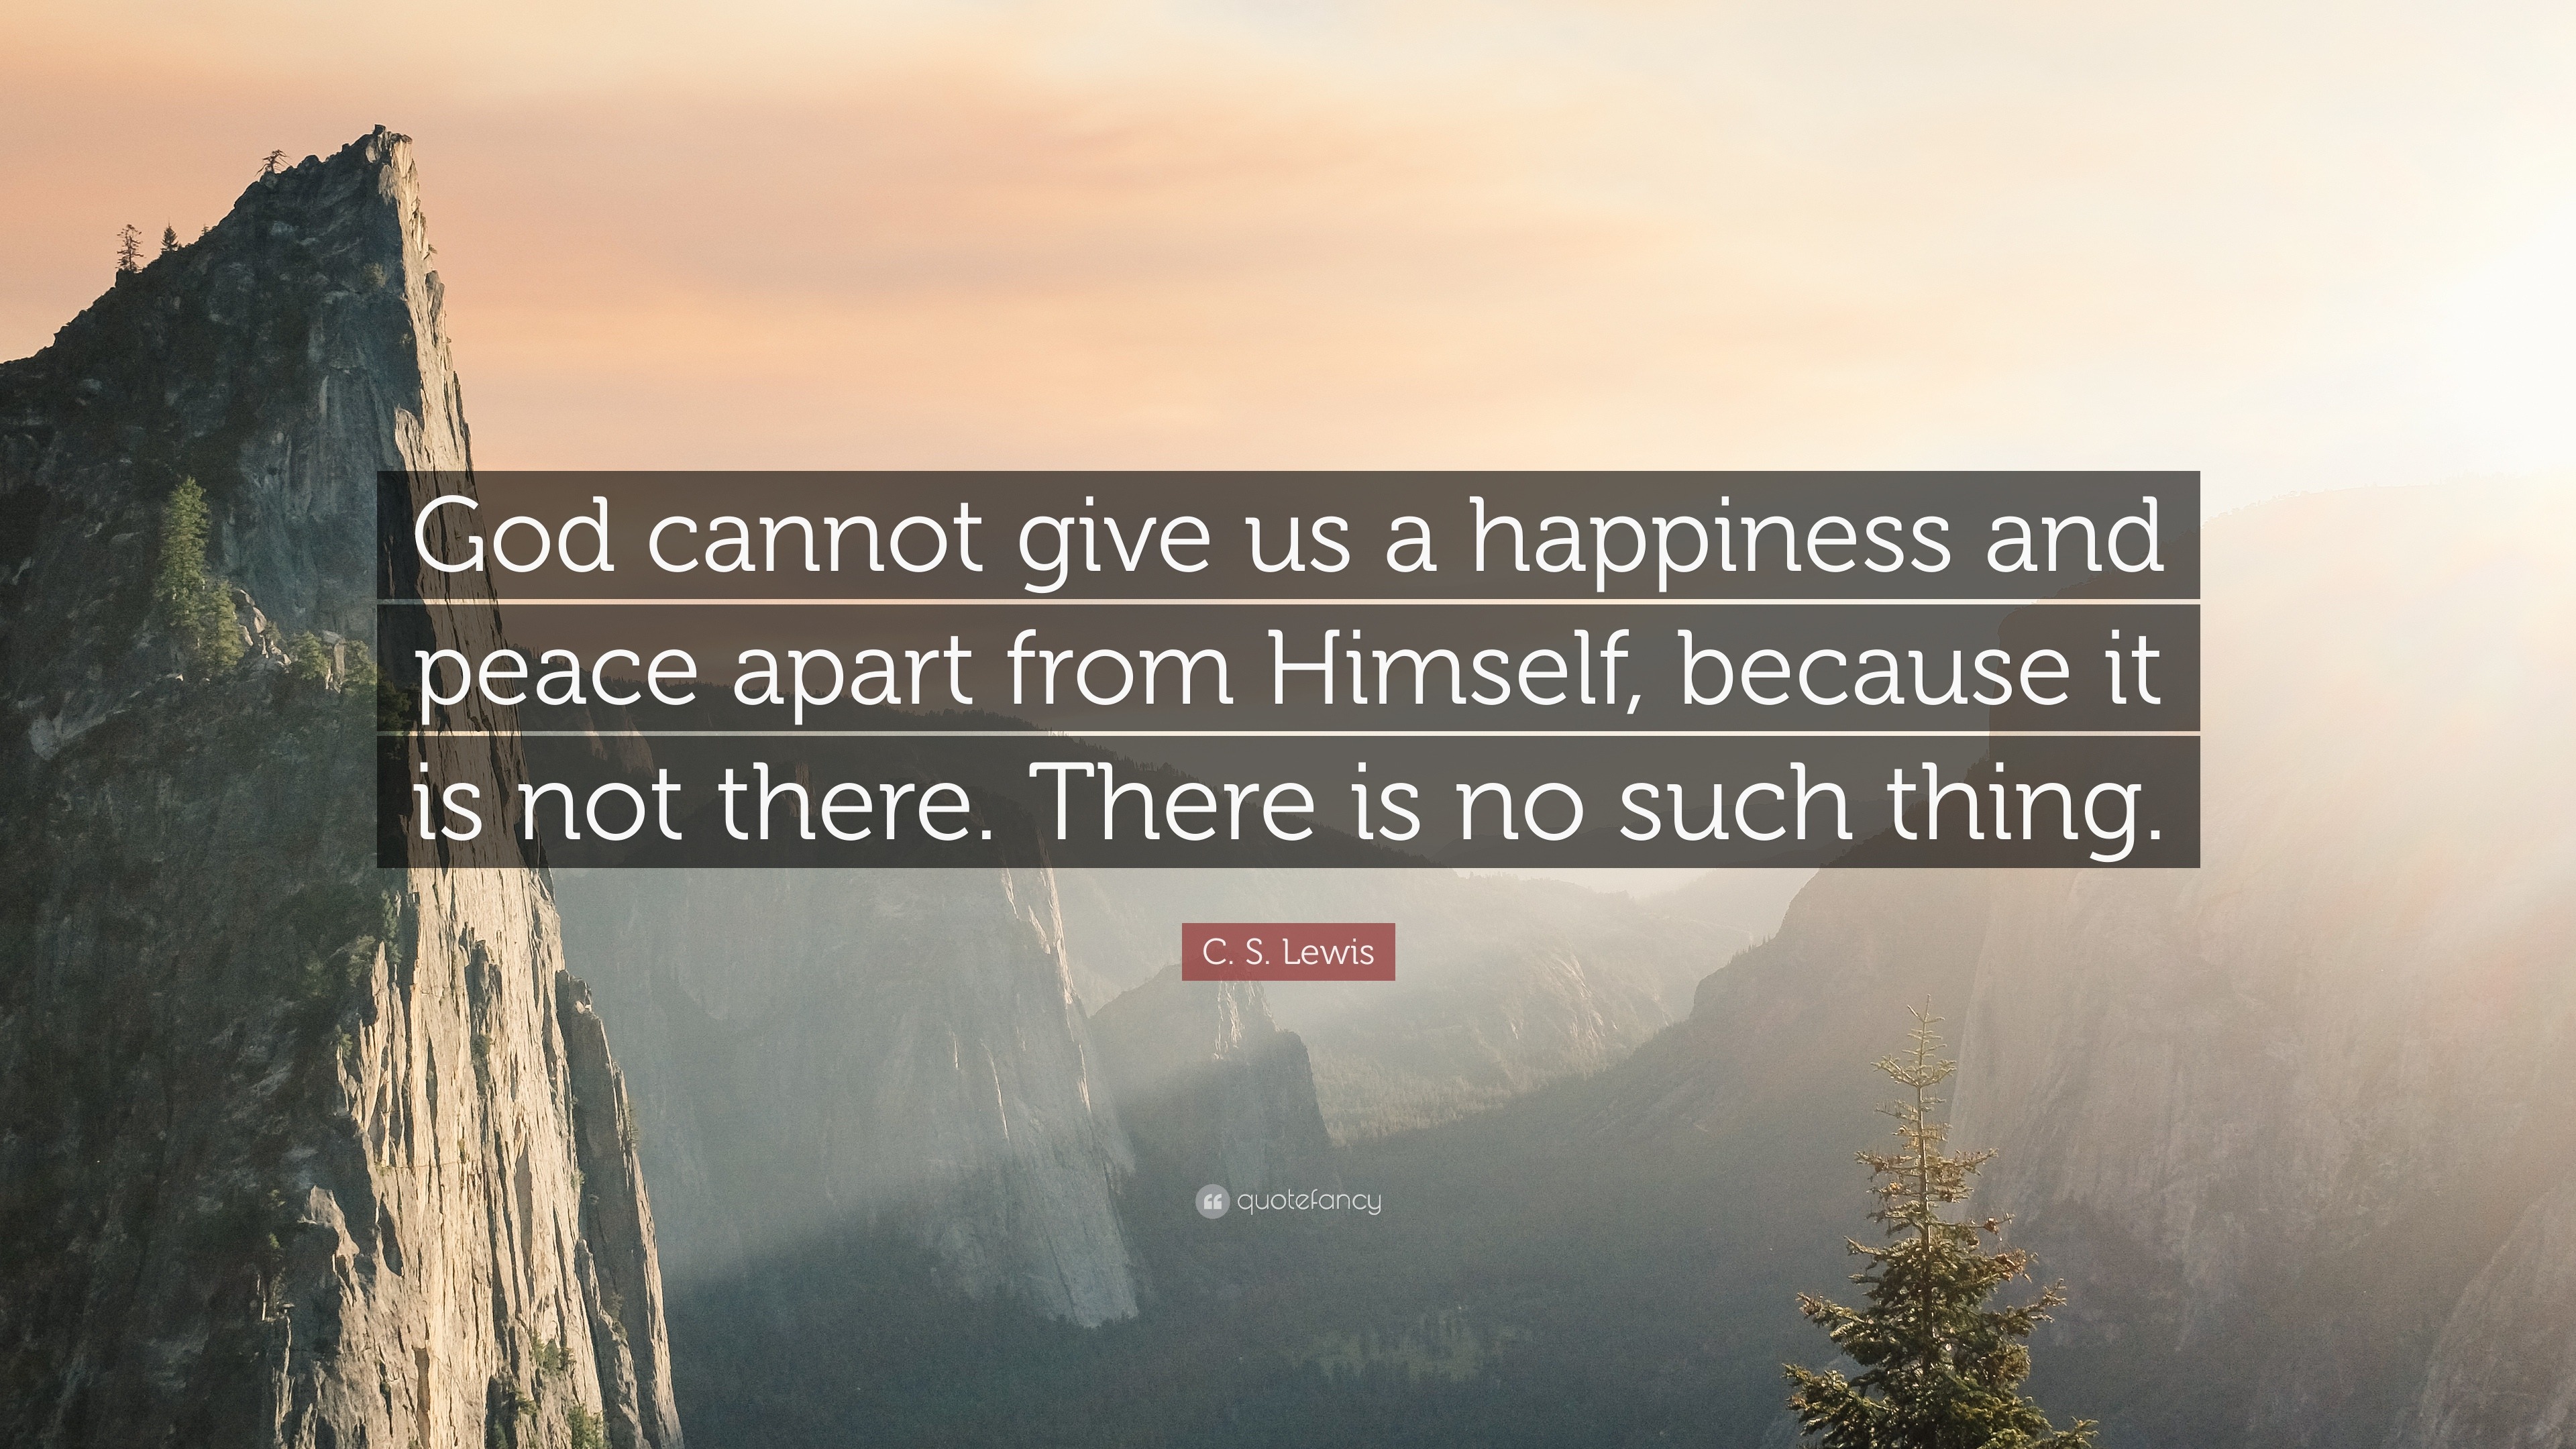 448500-C-S-Lewis-Quote-God-cannot-give-us-a-happiness-and-peace-apart.jpg